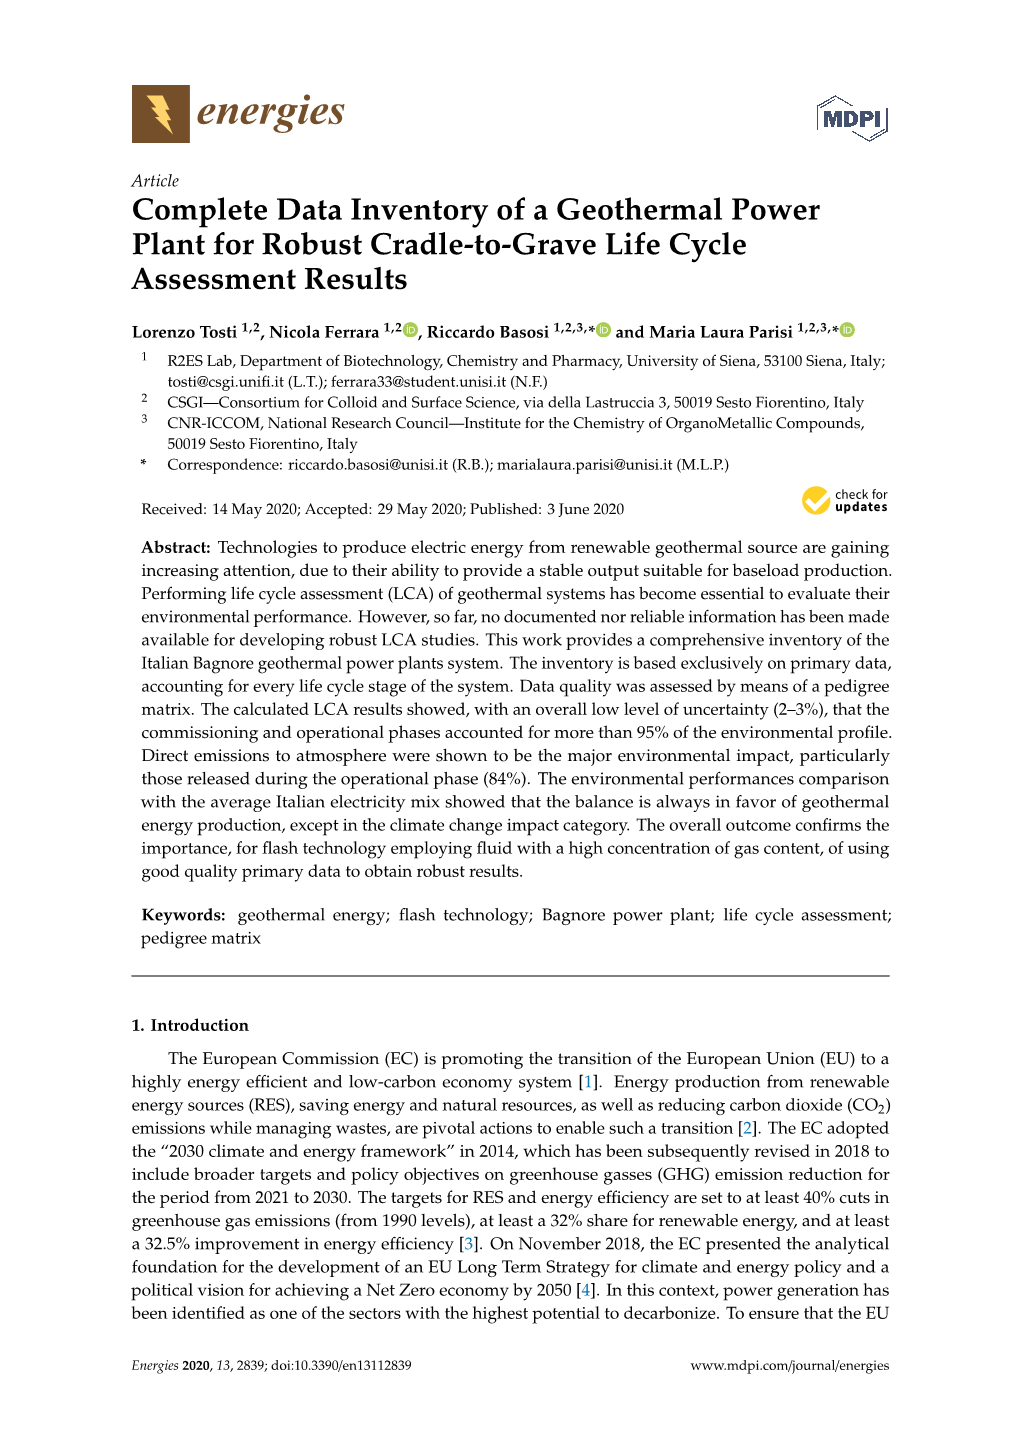 Complete Data Inventory of a Geothermal Power Plant for Robust Cradle-To-Grave Life Cycle Assessment Results